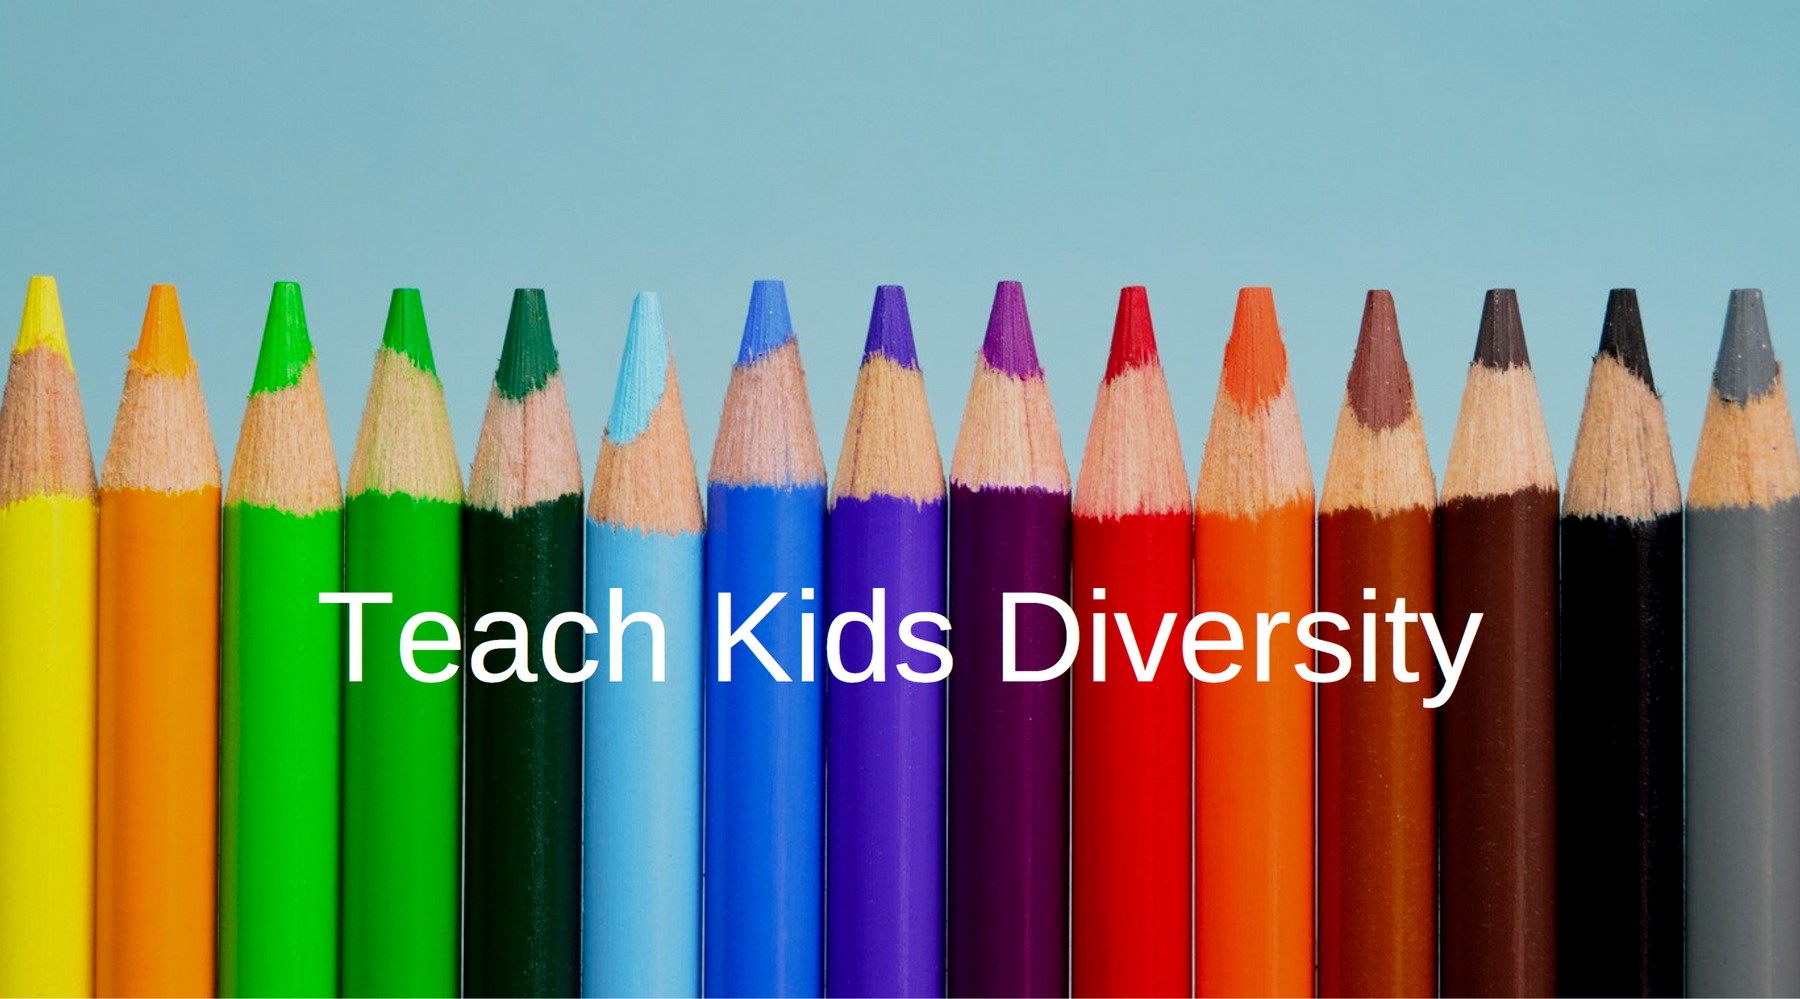 Why We’re Publishing “The ABCs of Diversity”